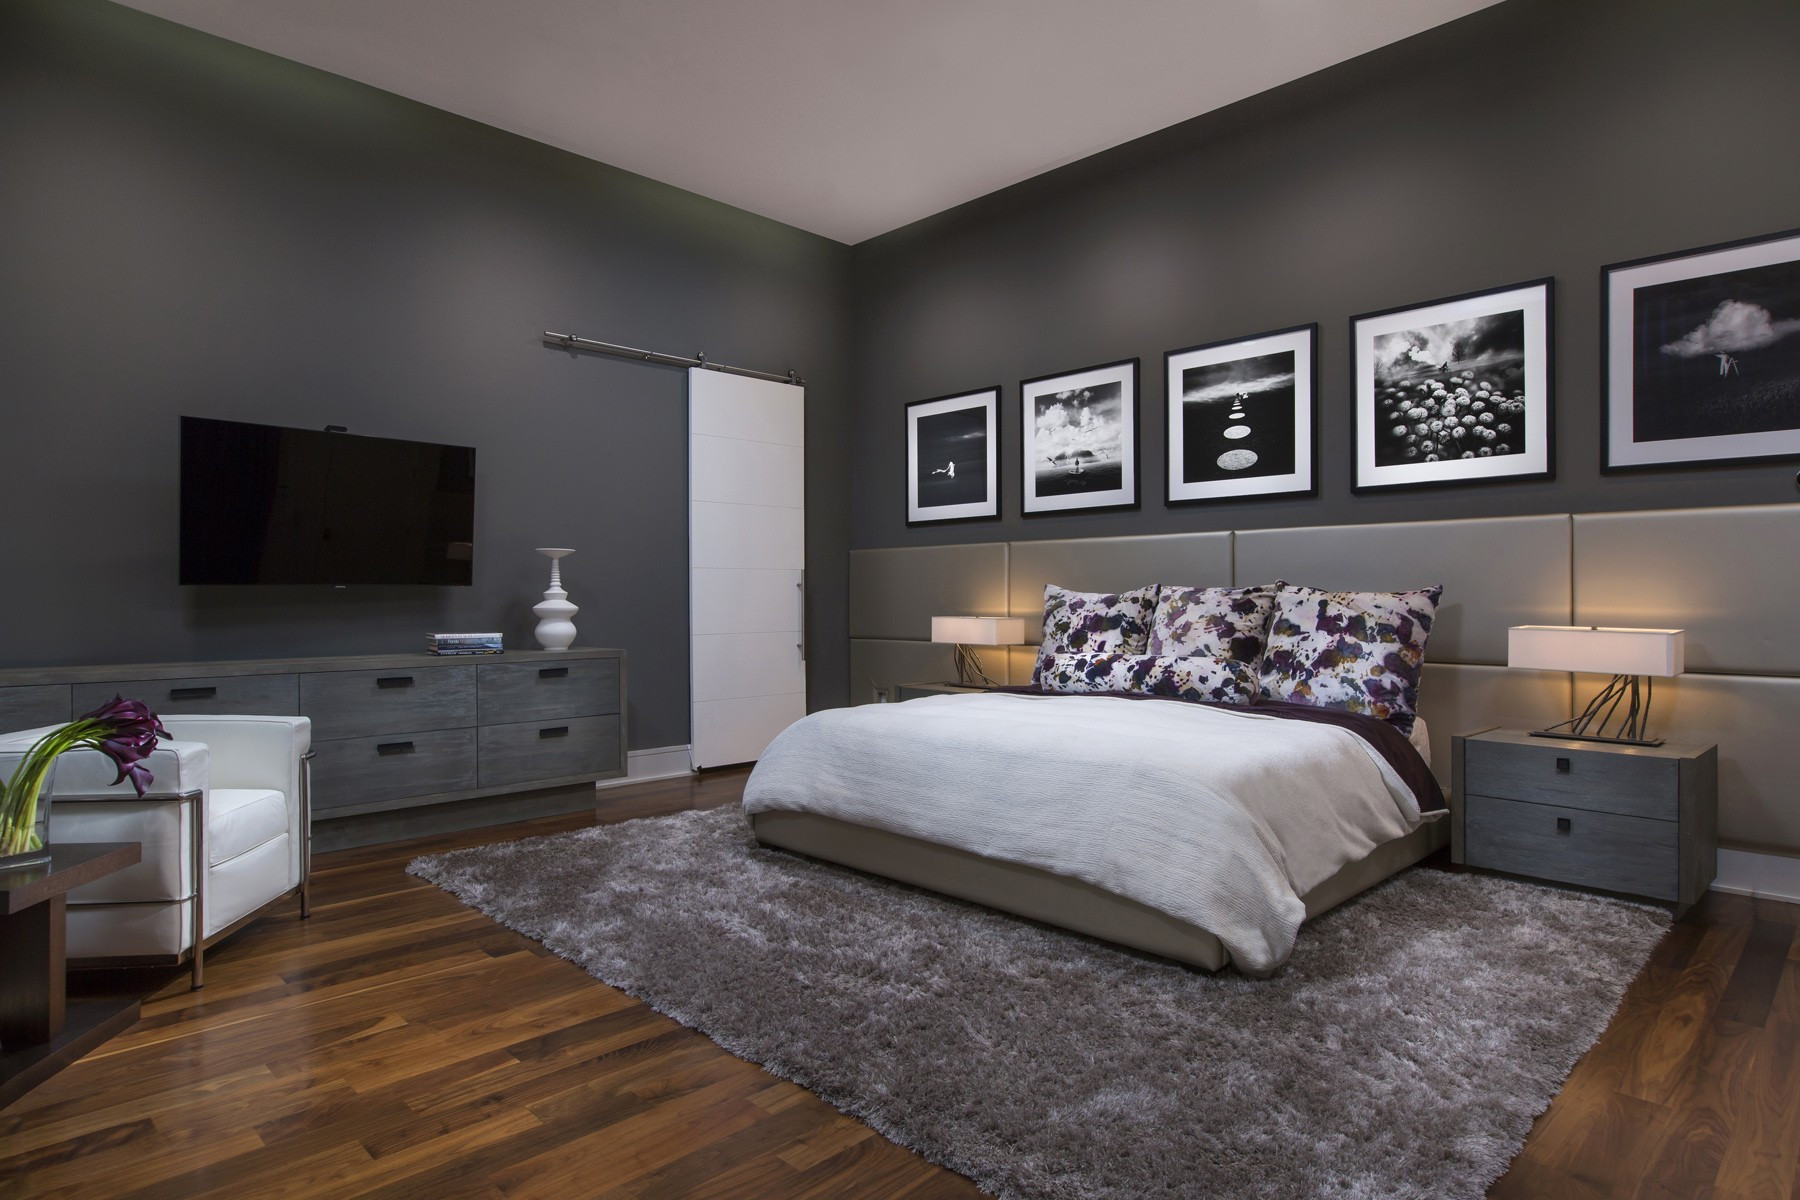 Best Master Bedroom Paint Colors
 Modern Interior Paint Trends For 2018